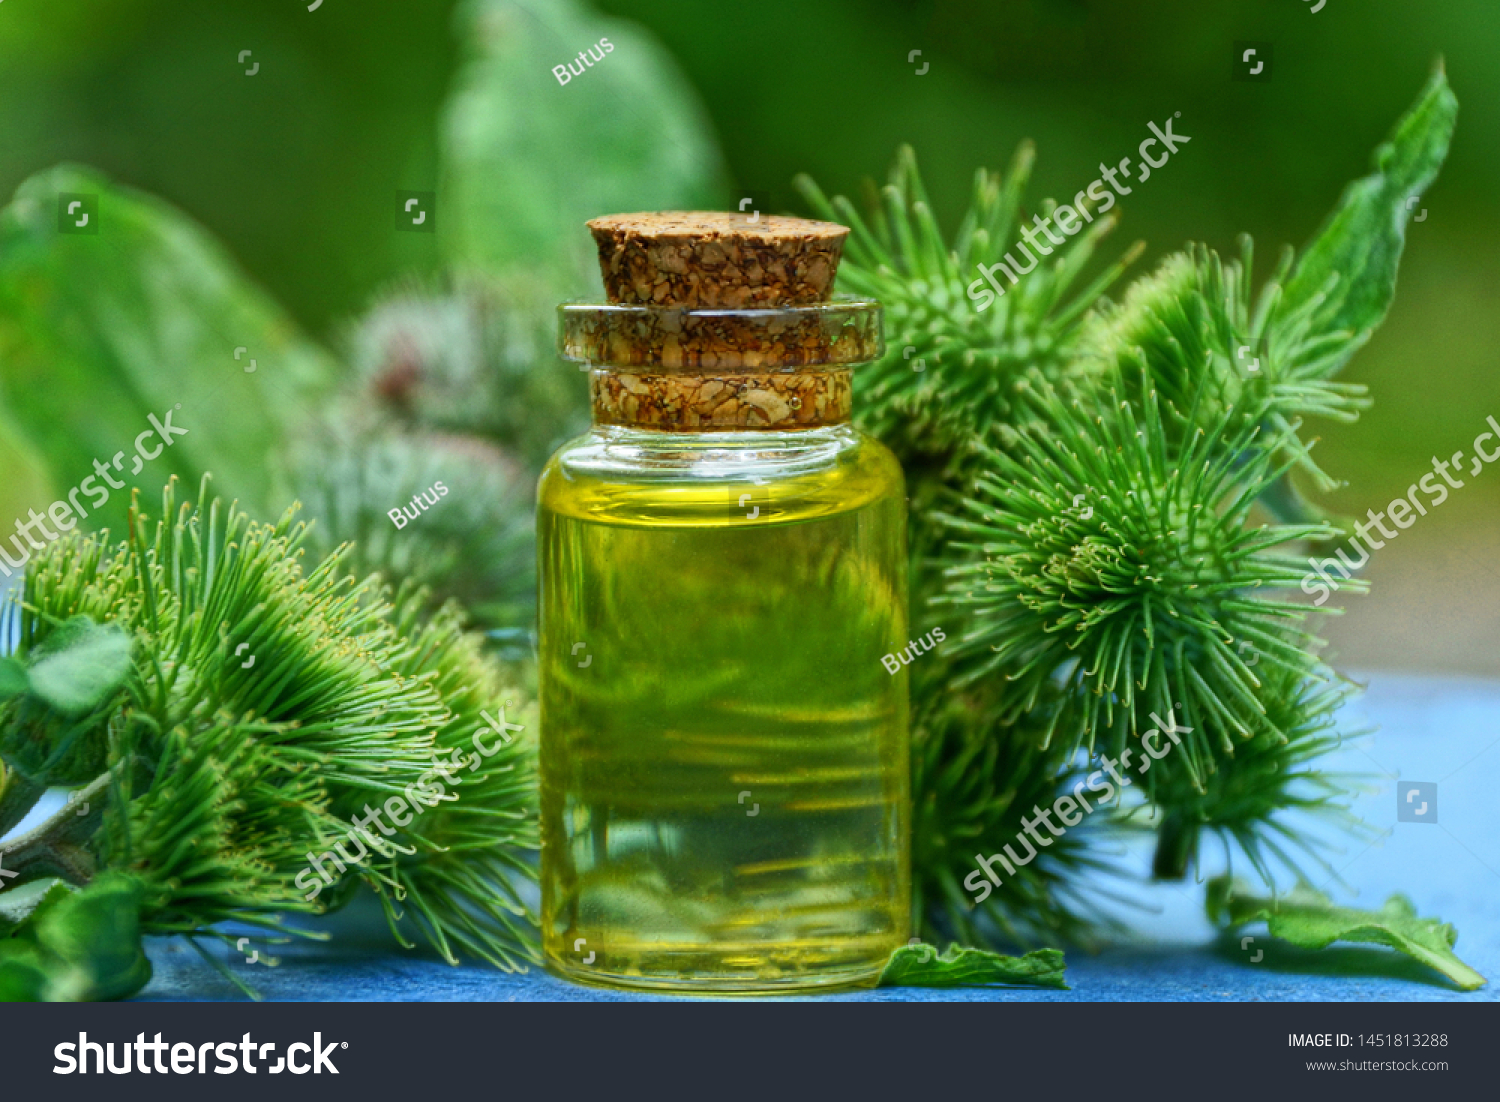 Download Small Glass Bottle Yellow Oil Green Stock Photo Edit Now 1451813288 Yellowimages Mockups